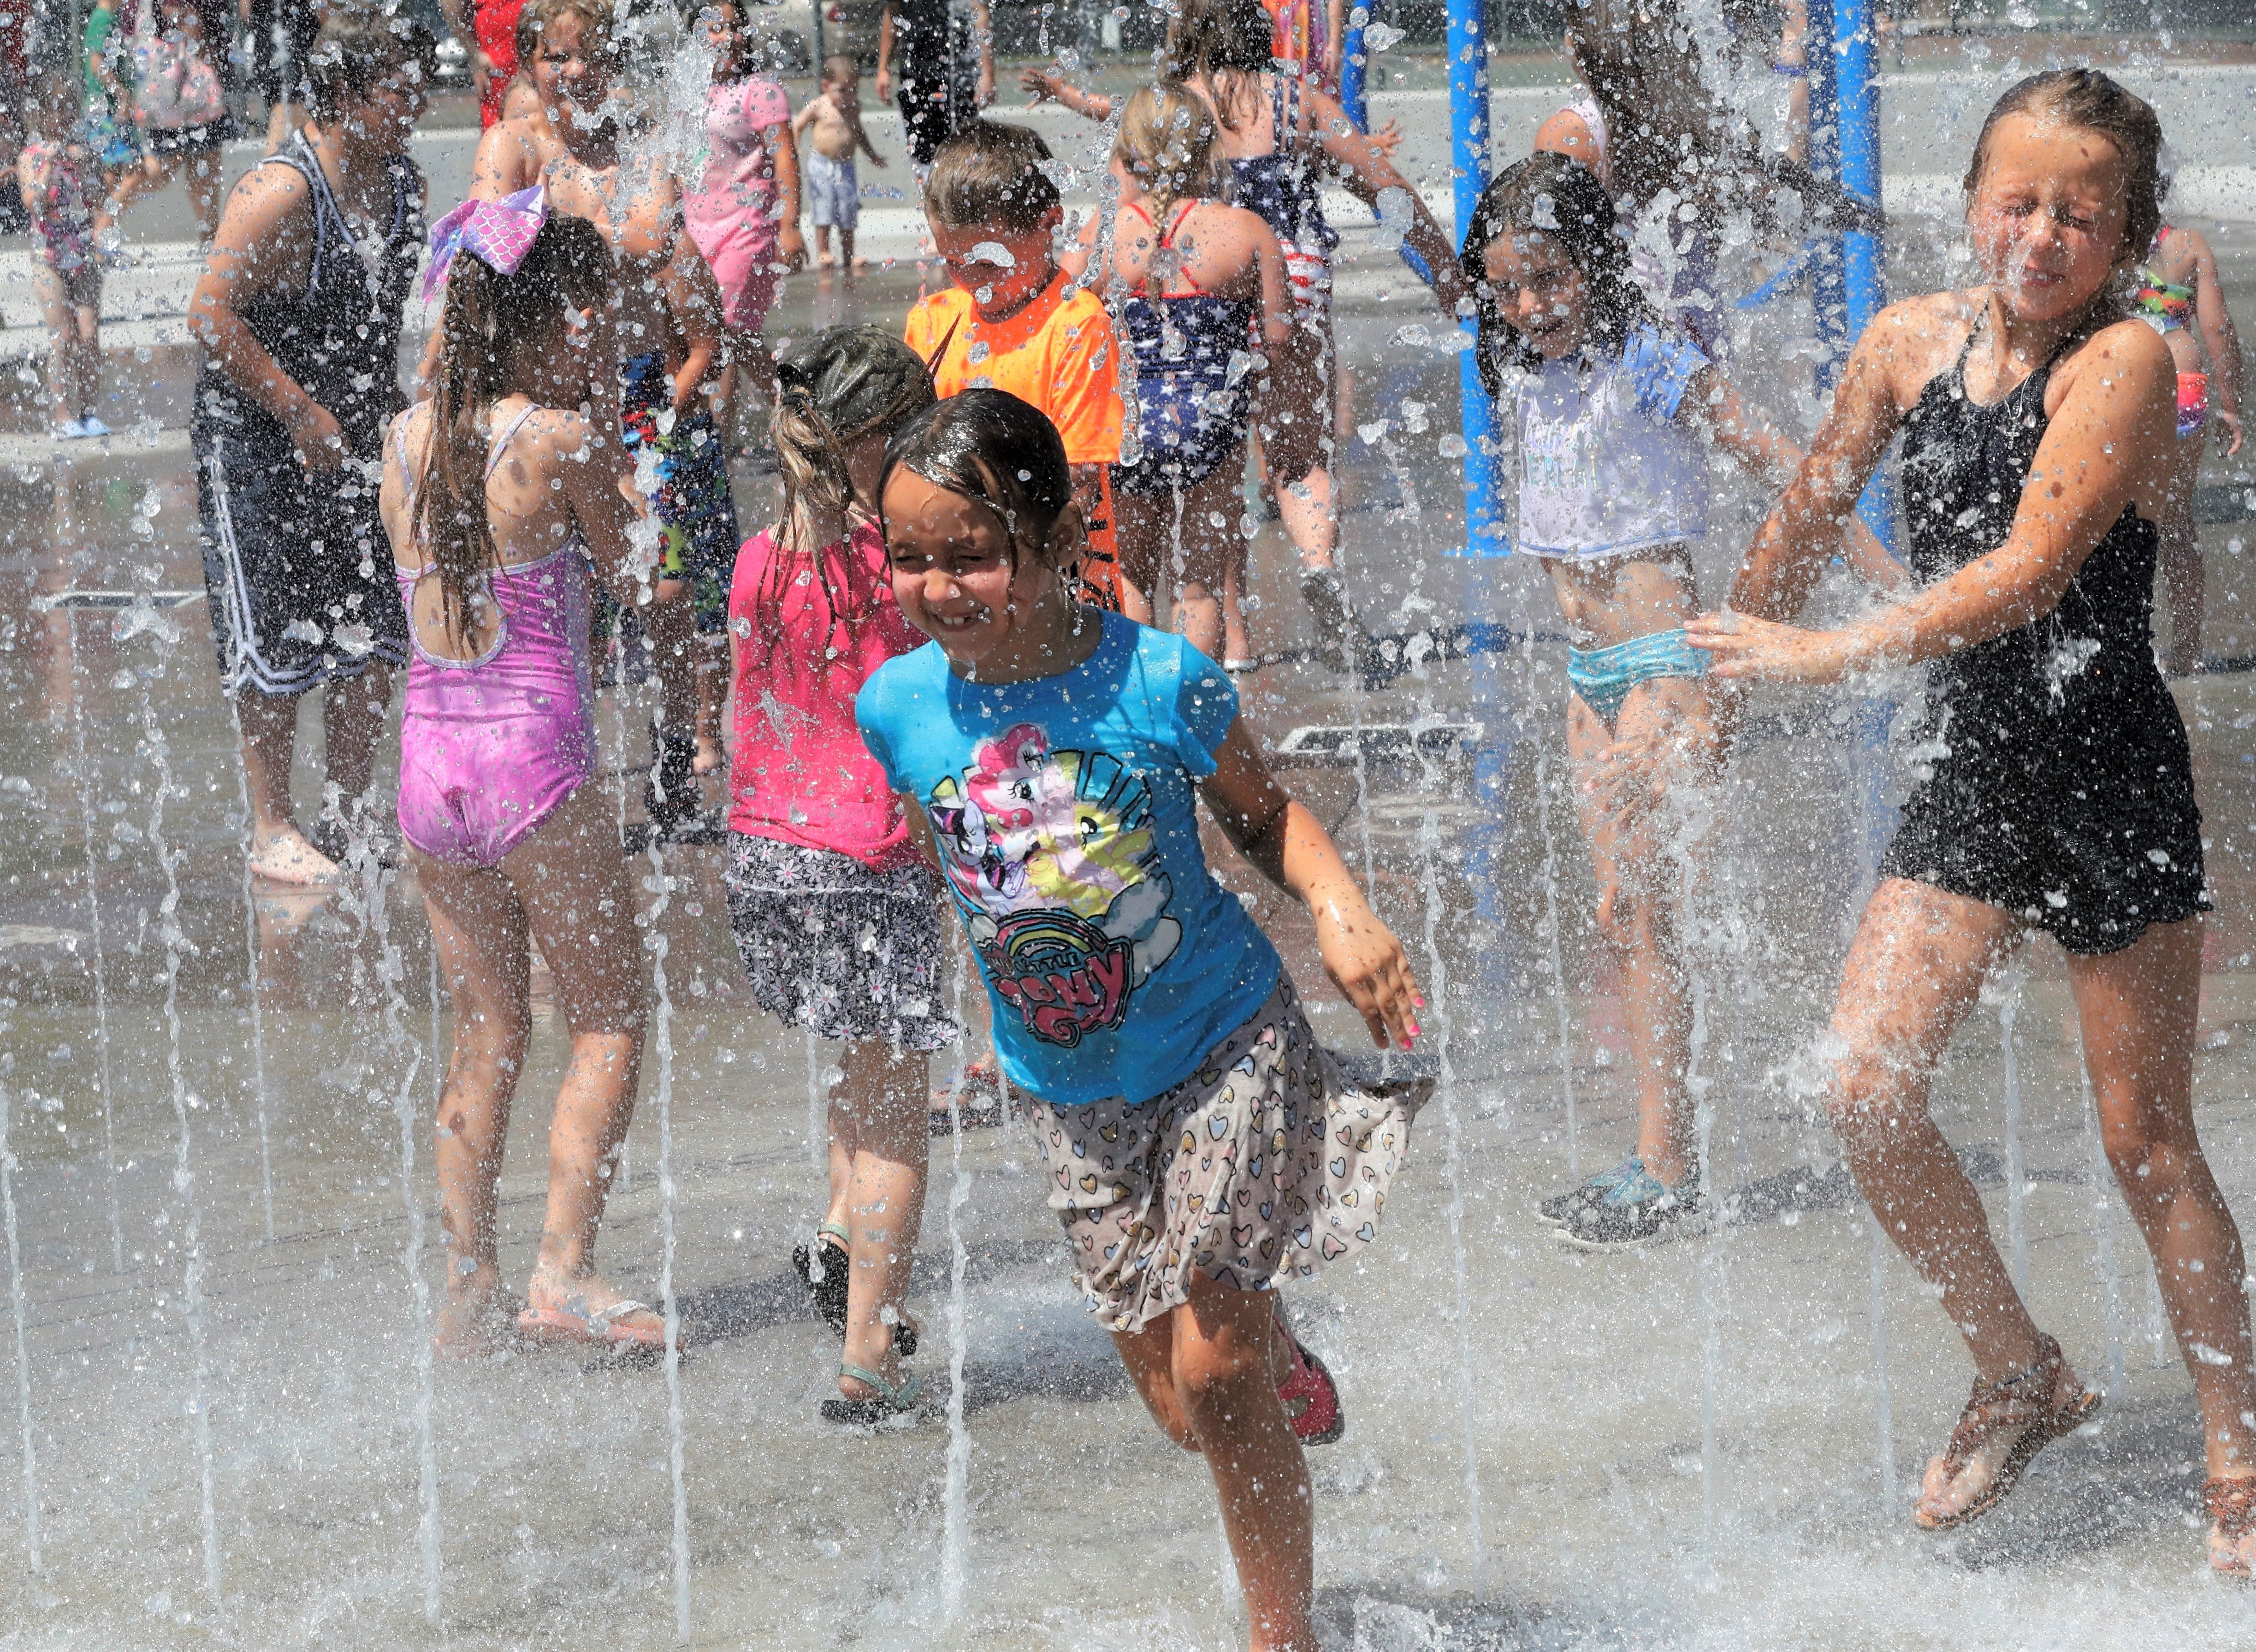 Both Redding and Las Vegas shattered heat records. But which city is really 'hot stuff?'